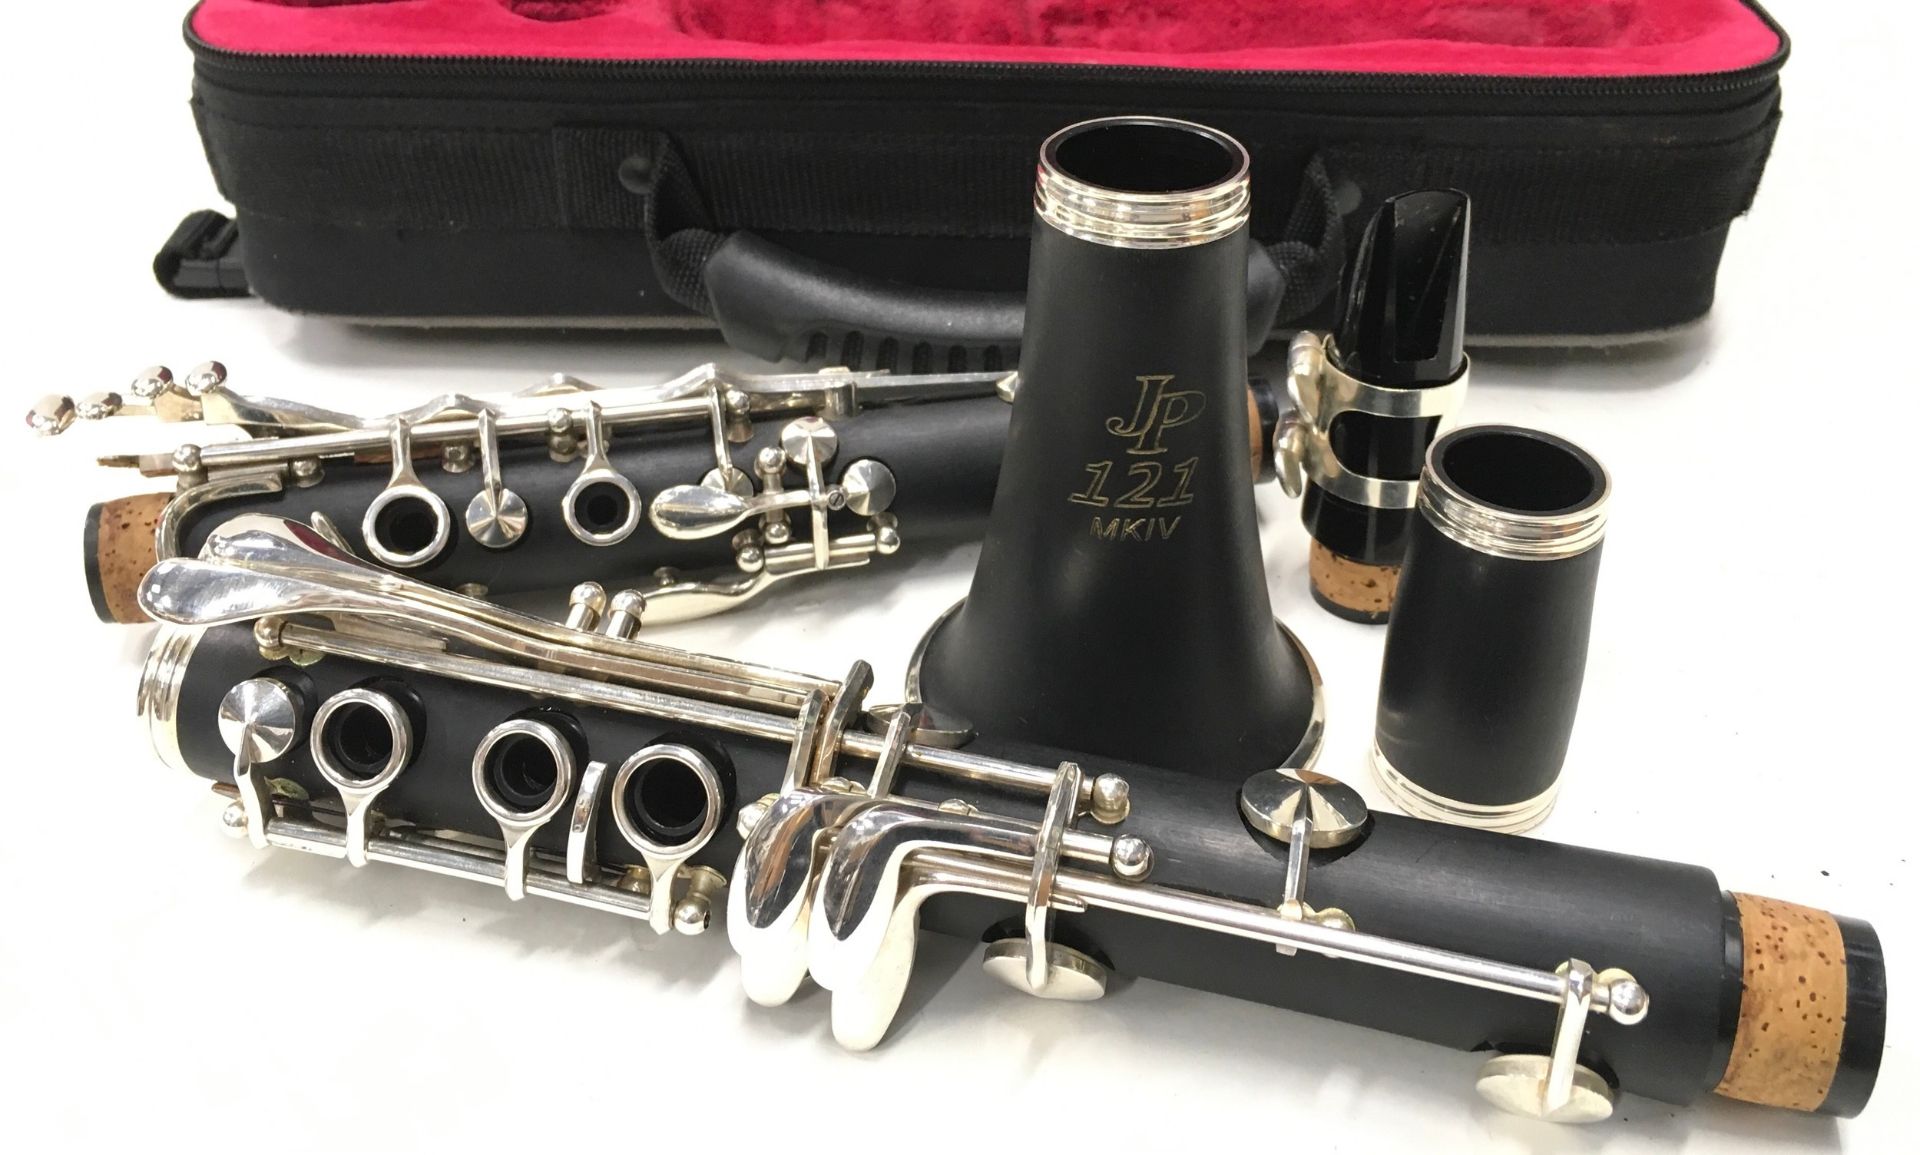 John Packer JP 121 mkIV clarinet in carry case. Very good cosmetic condition. - Image 2 of 3